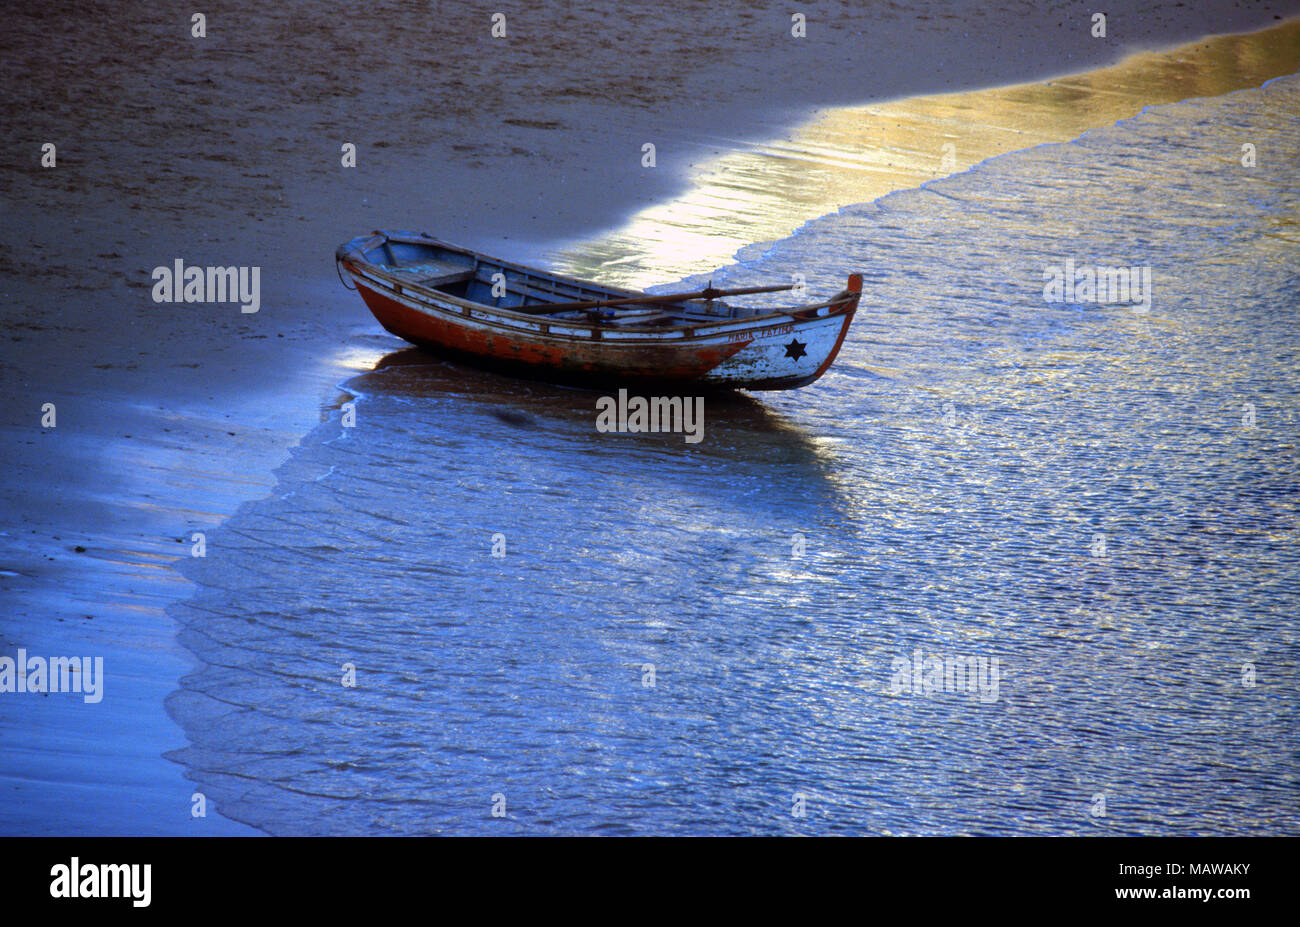 A rowboat sits at the water's edge in Estoril, Portugal Stock Photo